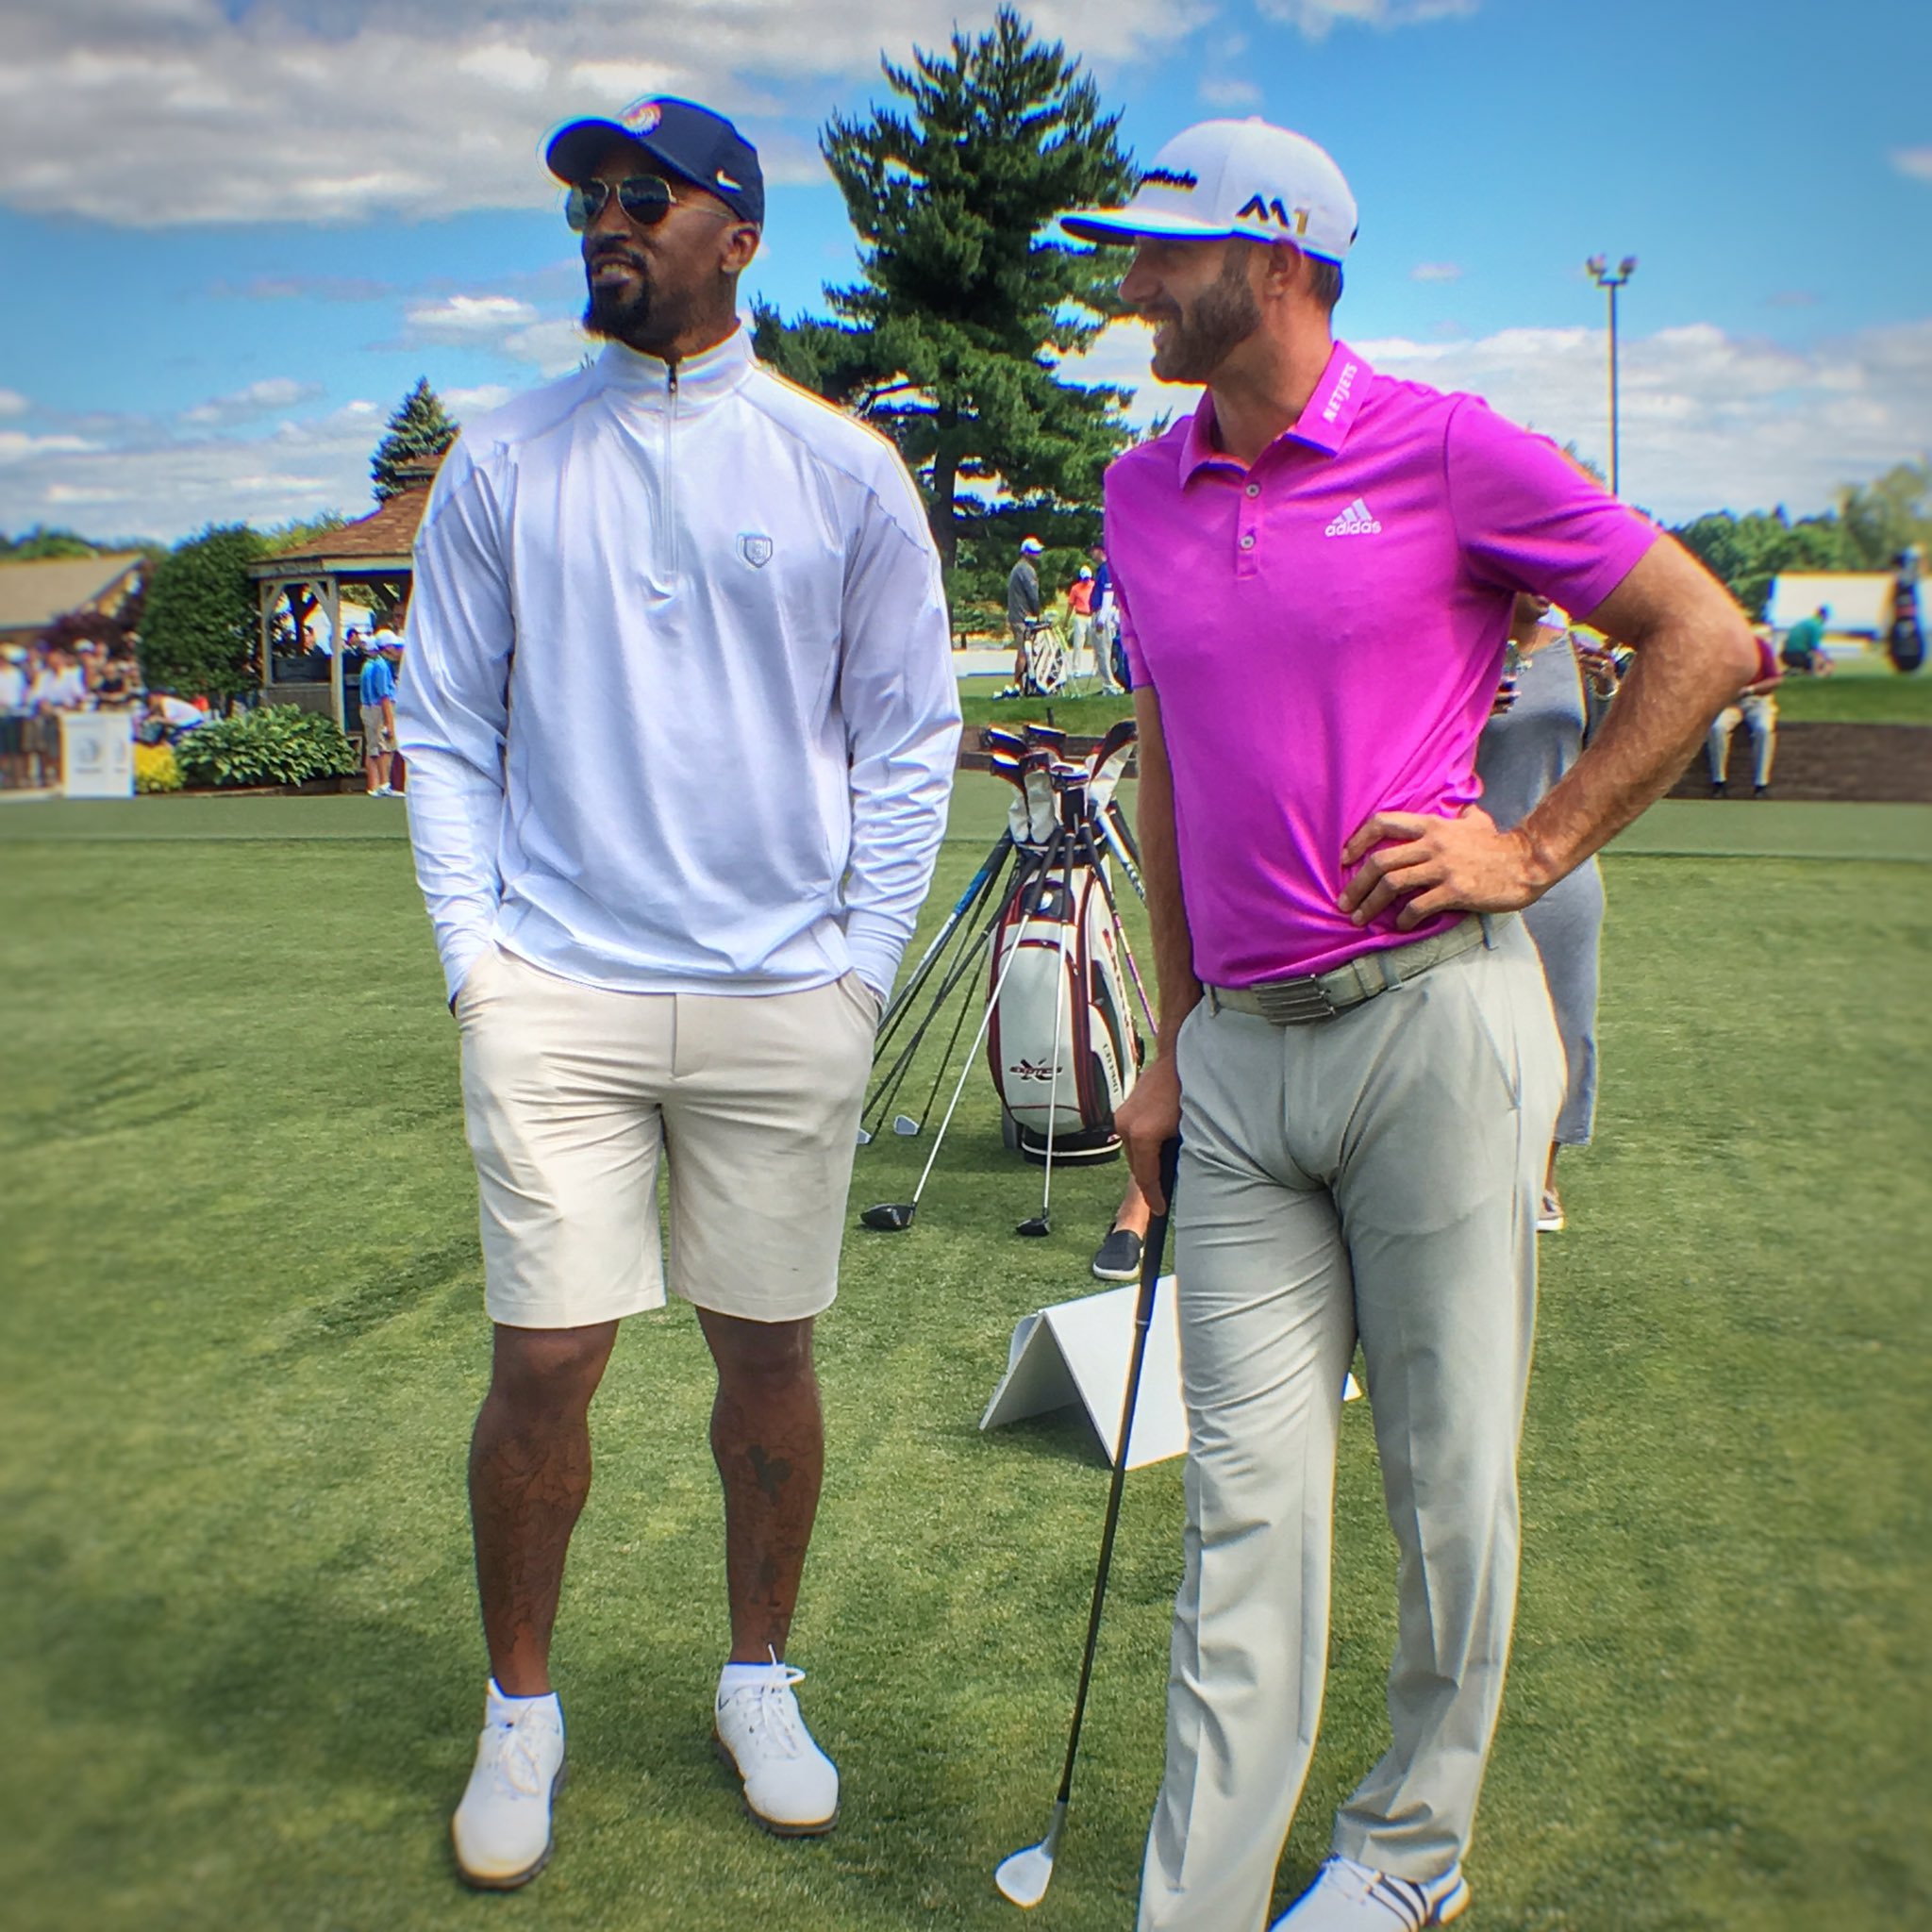 Dustin Johnson on Twitter: "Talking golf and with the world @TheRealJRSmith! https://t.co/5BkfM6450u" Twitter